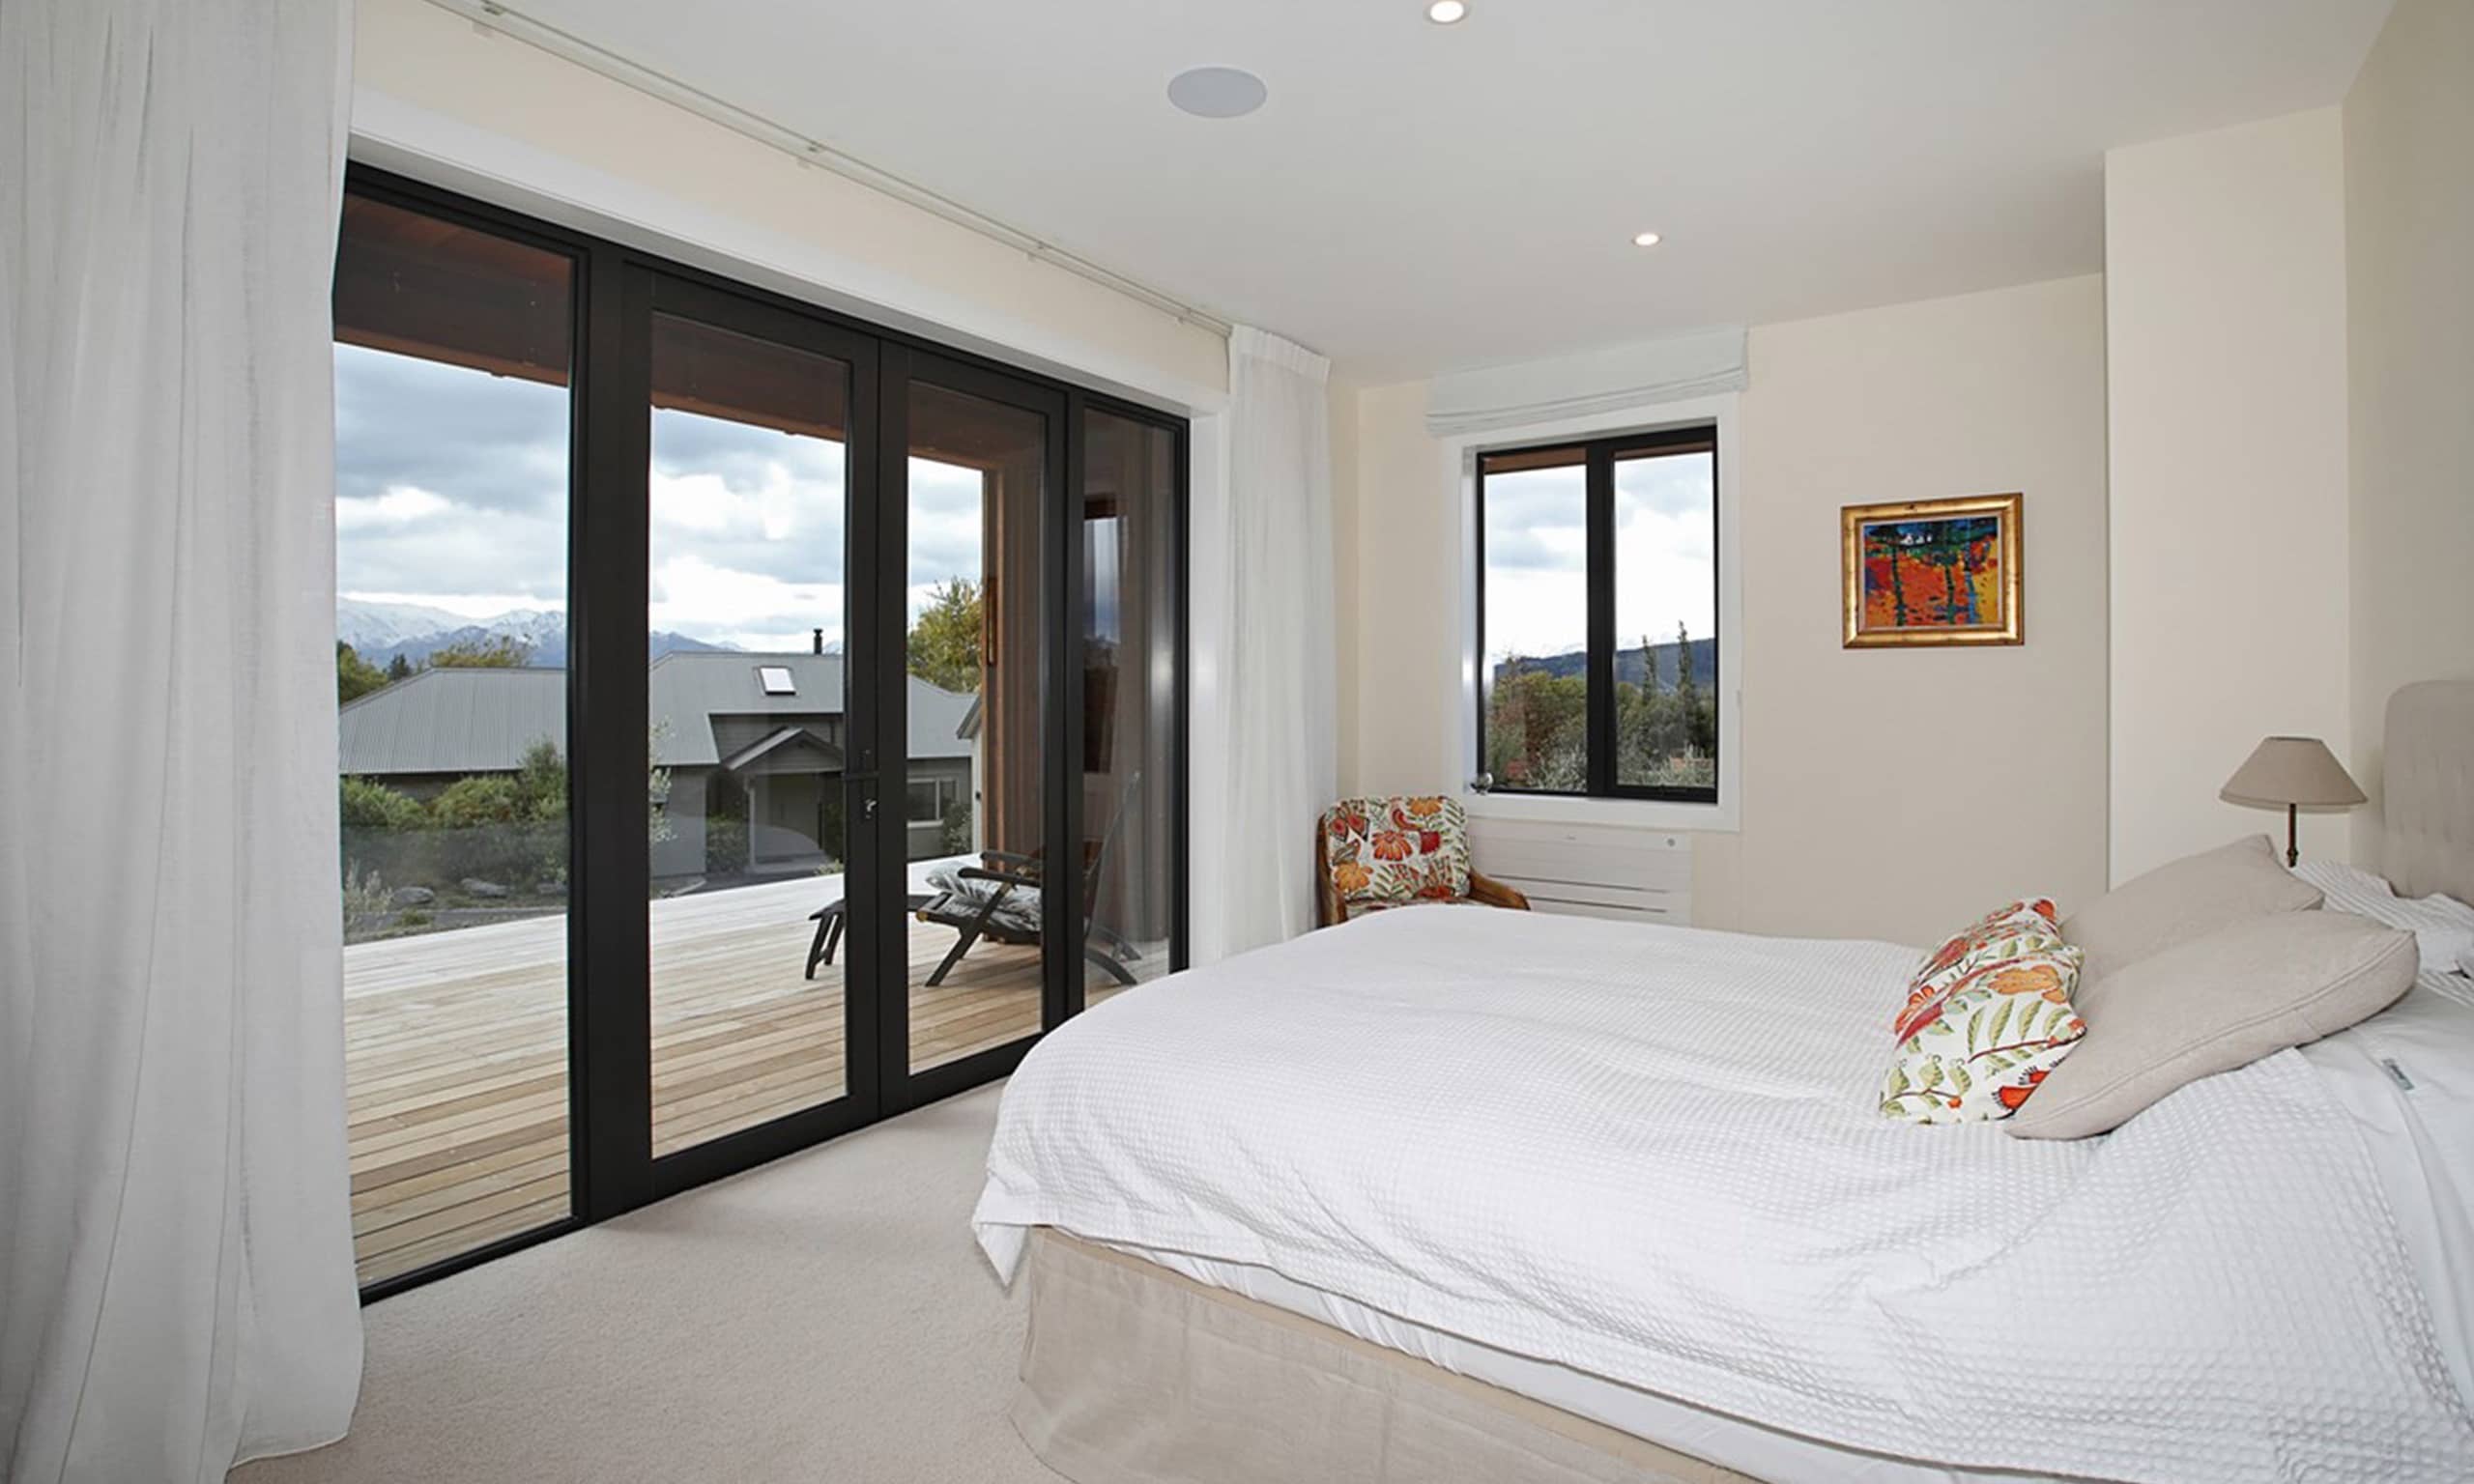 French doors from bedroom onto deck